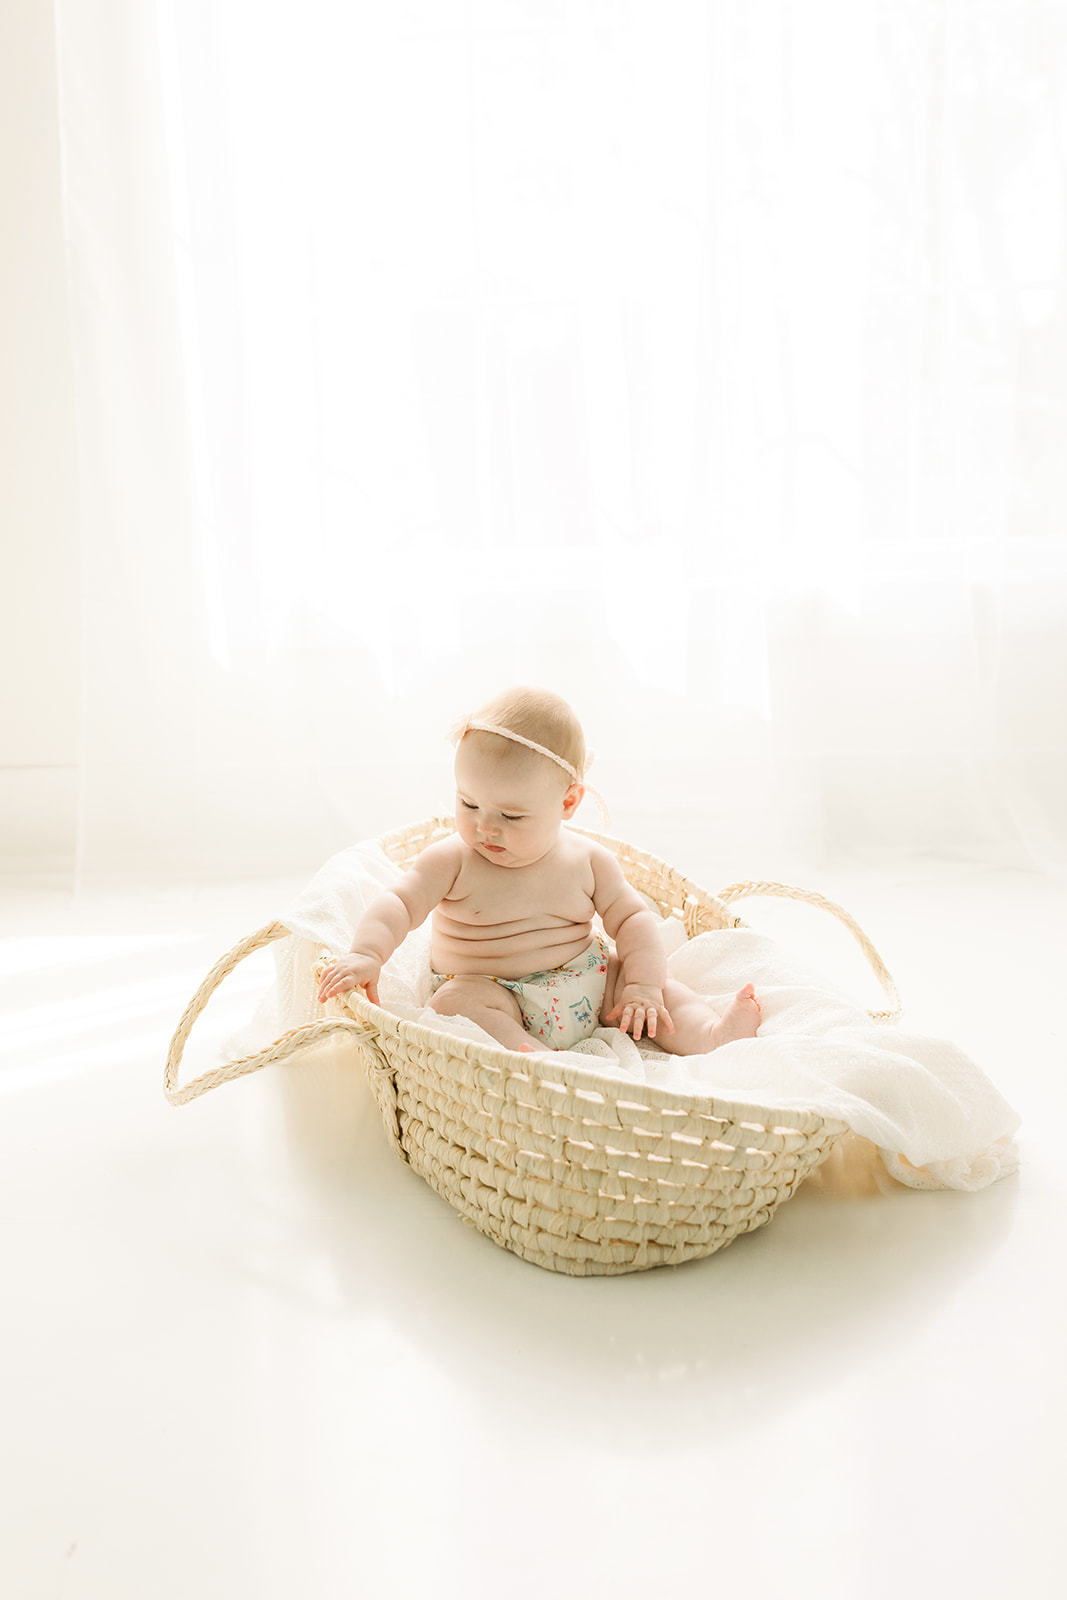 An infant sits in a woven basket in a studio wearing only a diaper before visiting a indoor playground pittsburgh